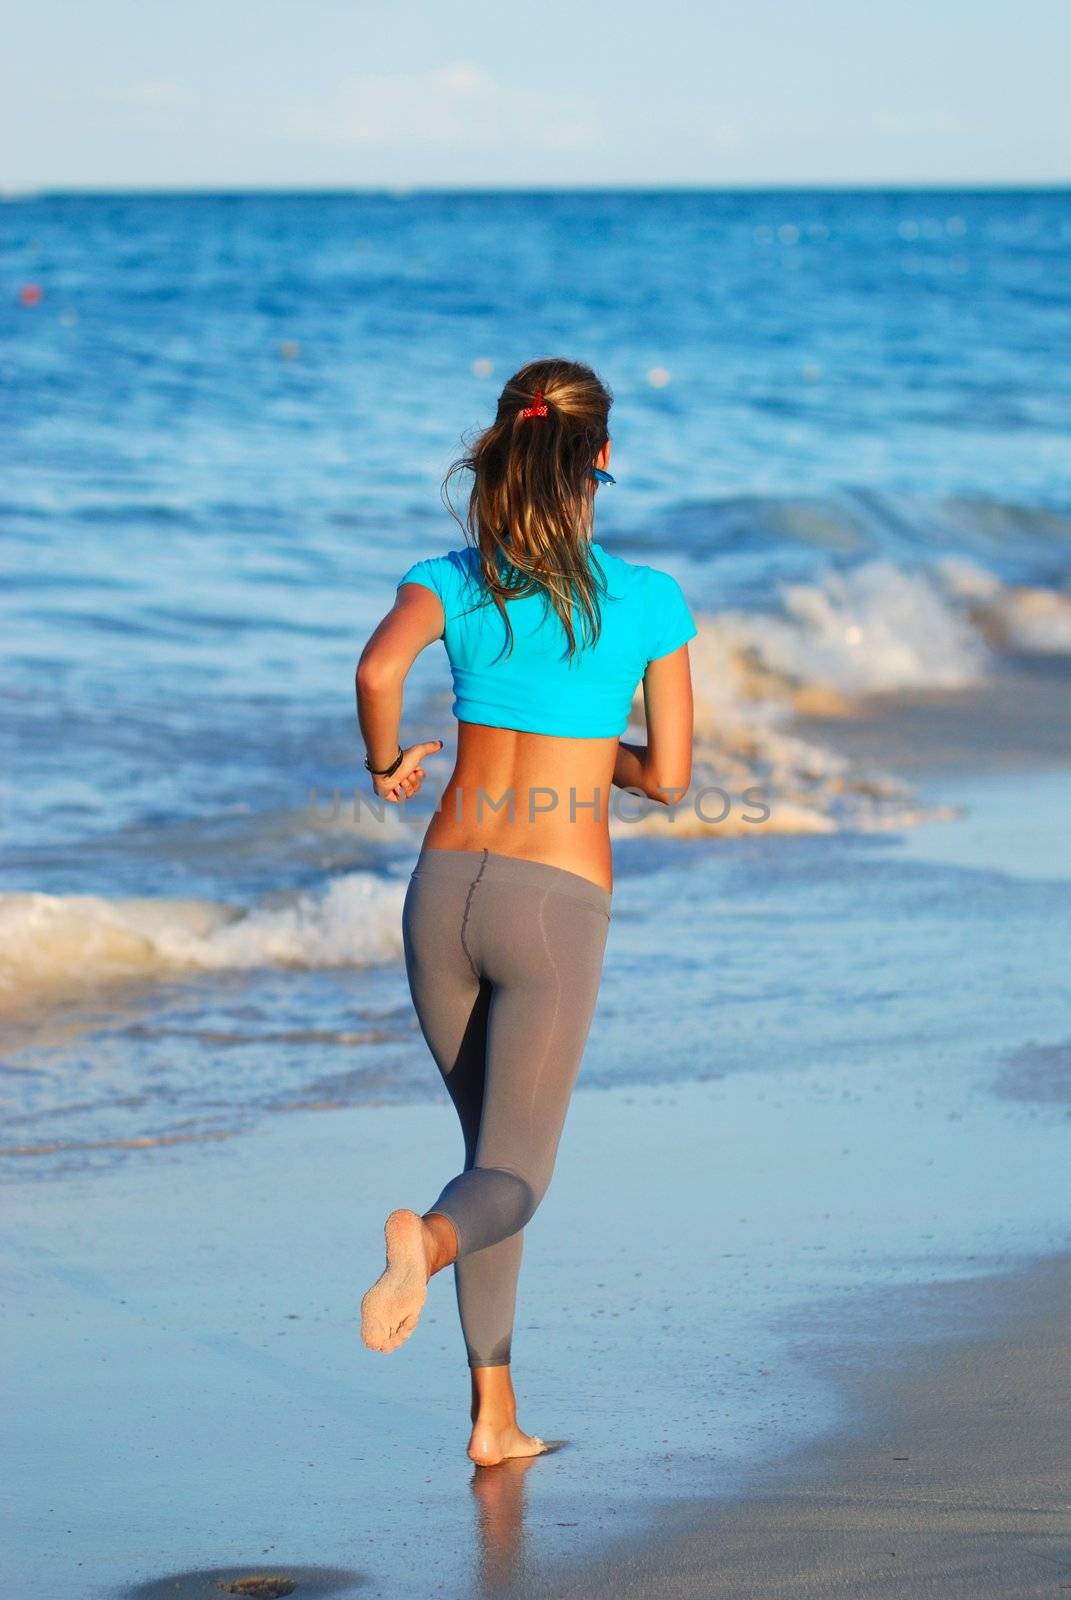 Jogging at beach by haveseen